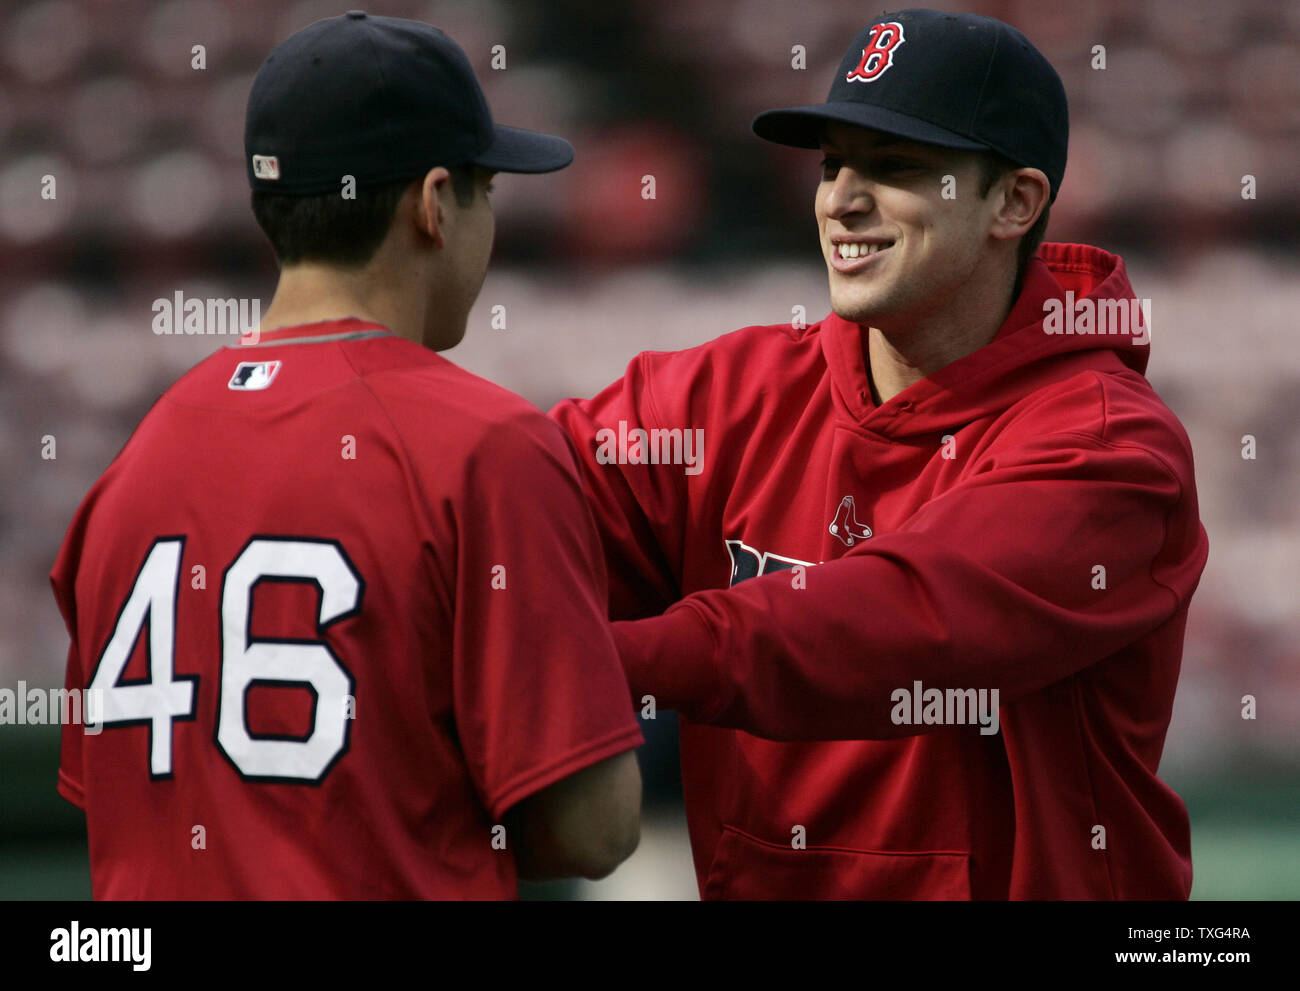 Boston Red Sox center fielder Jacoby Ellsbury (46) jokes around with  teammate Jed Lowrie before game three of the ALCS against the Tampa Bay  Rays at Fenway Park in Boston, Massachusetts on